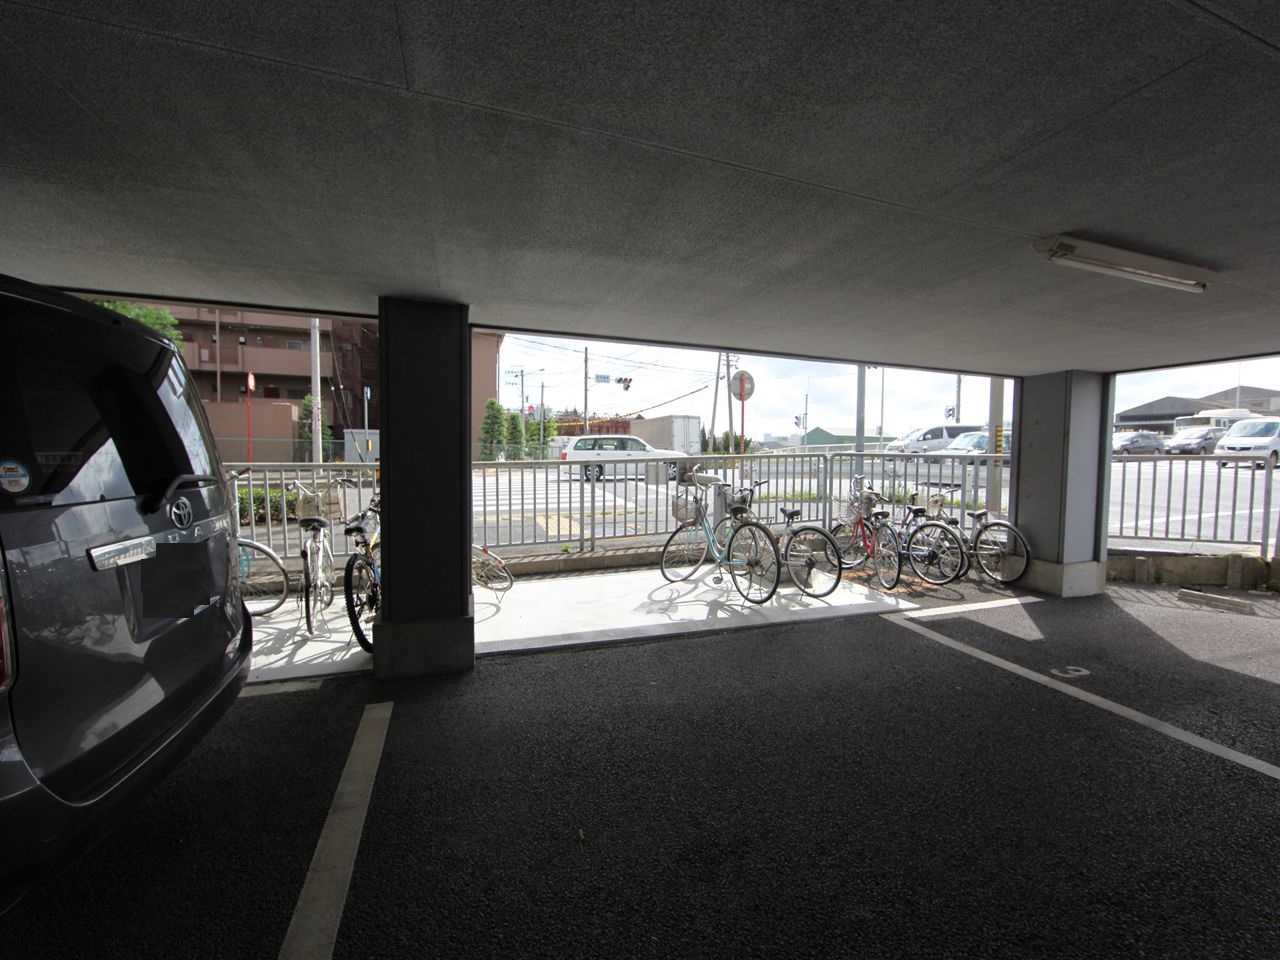 Parking lot. Parking Lot Bicycle equipped Free, please check